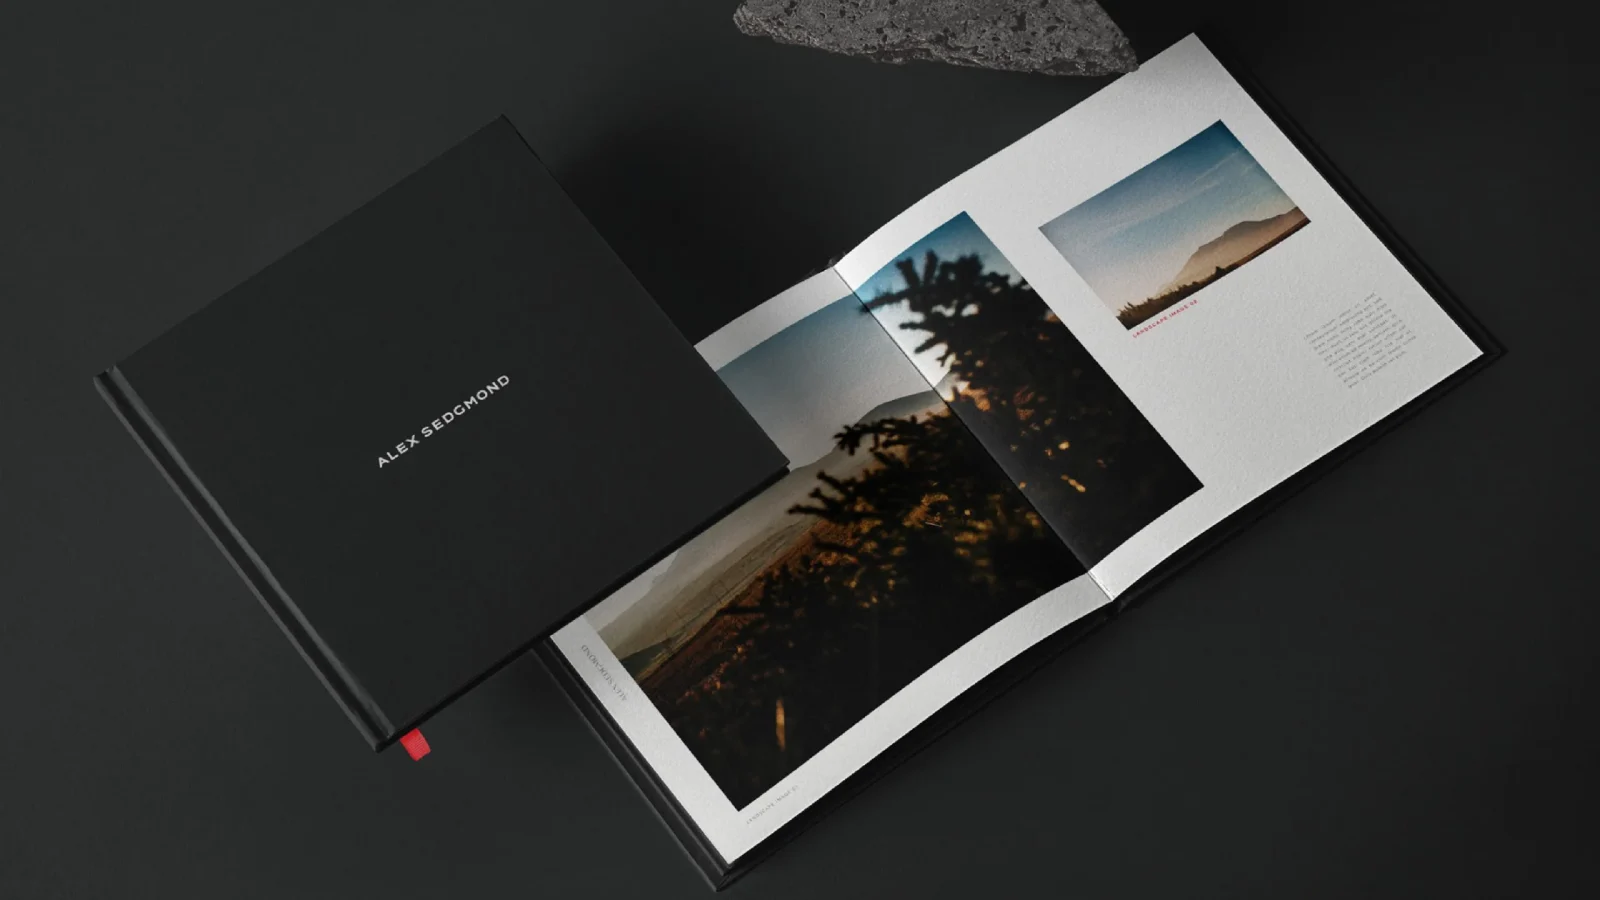 A hardcover photo book open on a dark surface displaying landscape photographs; the left page shows a sunny coastal scene and the right page includes a mountain vista designed by a design agency in Bristol.